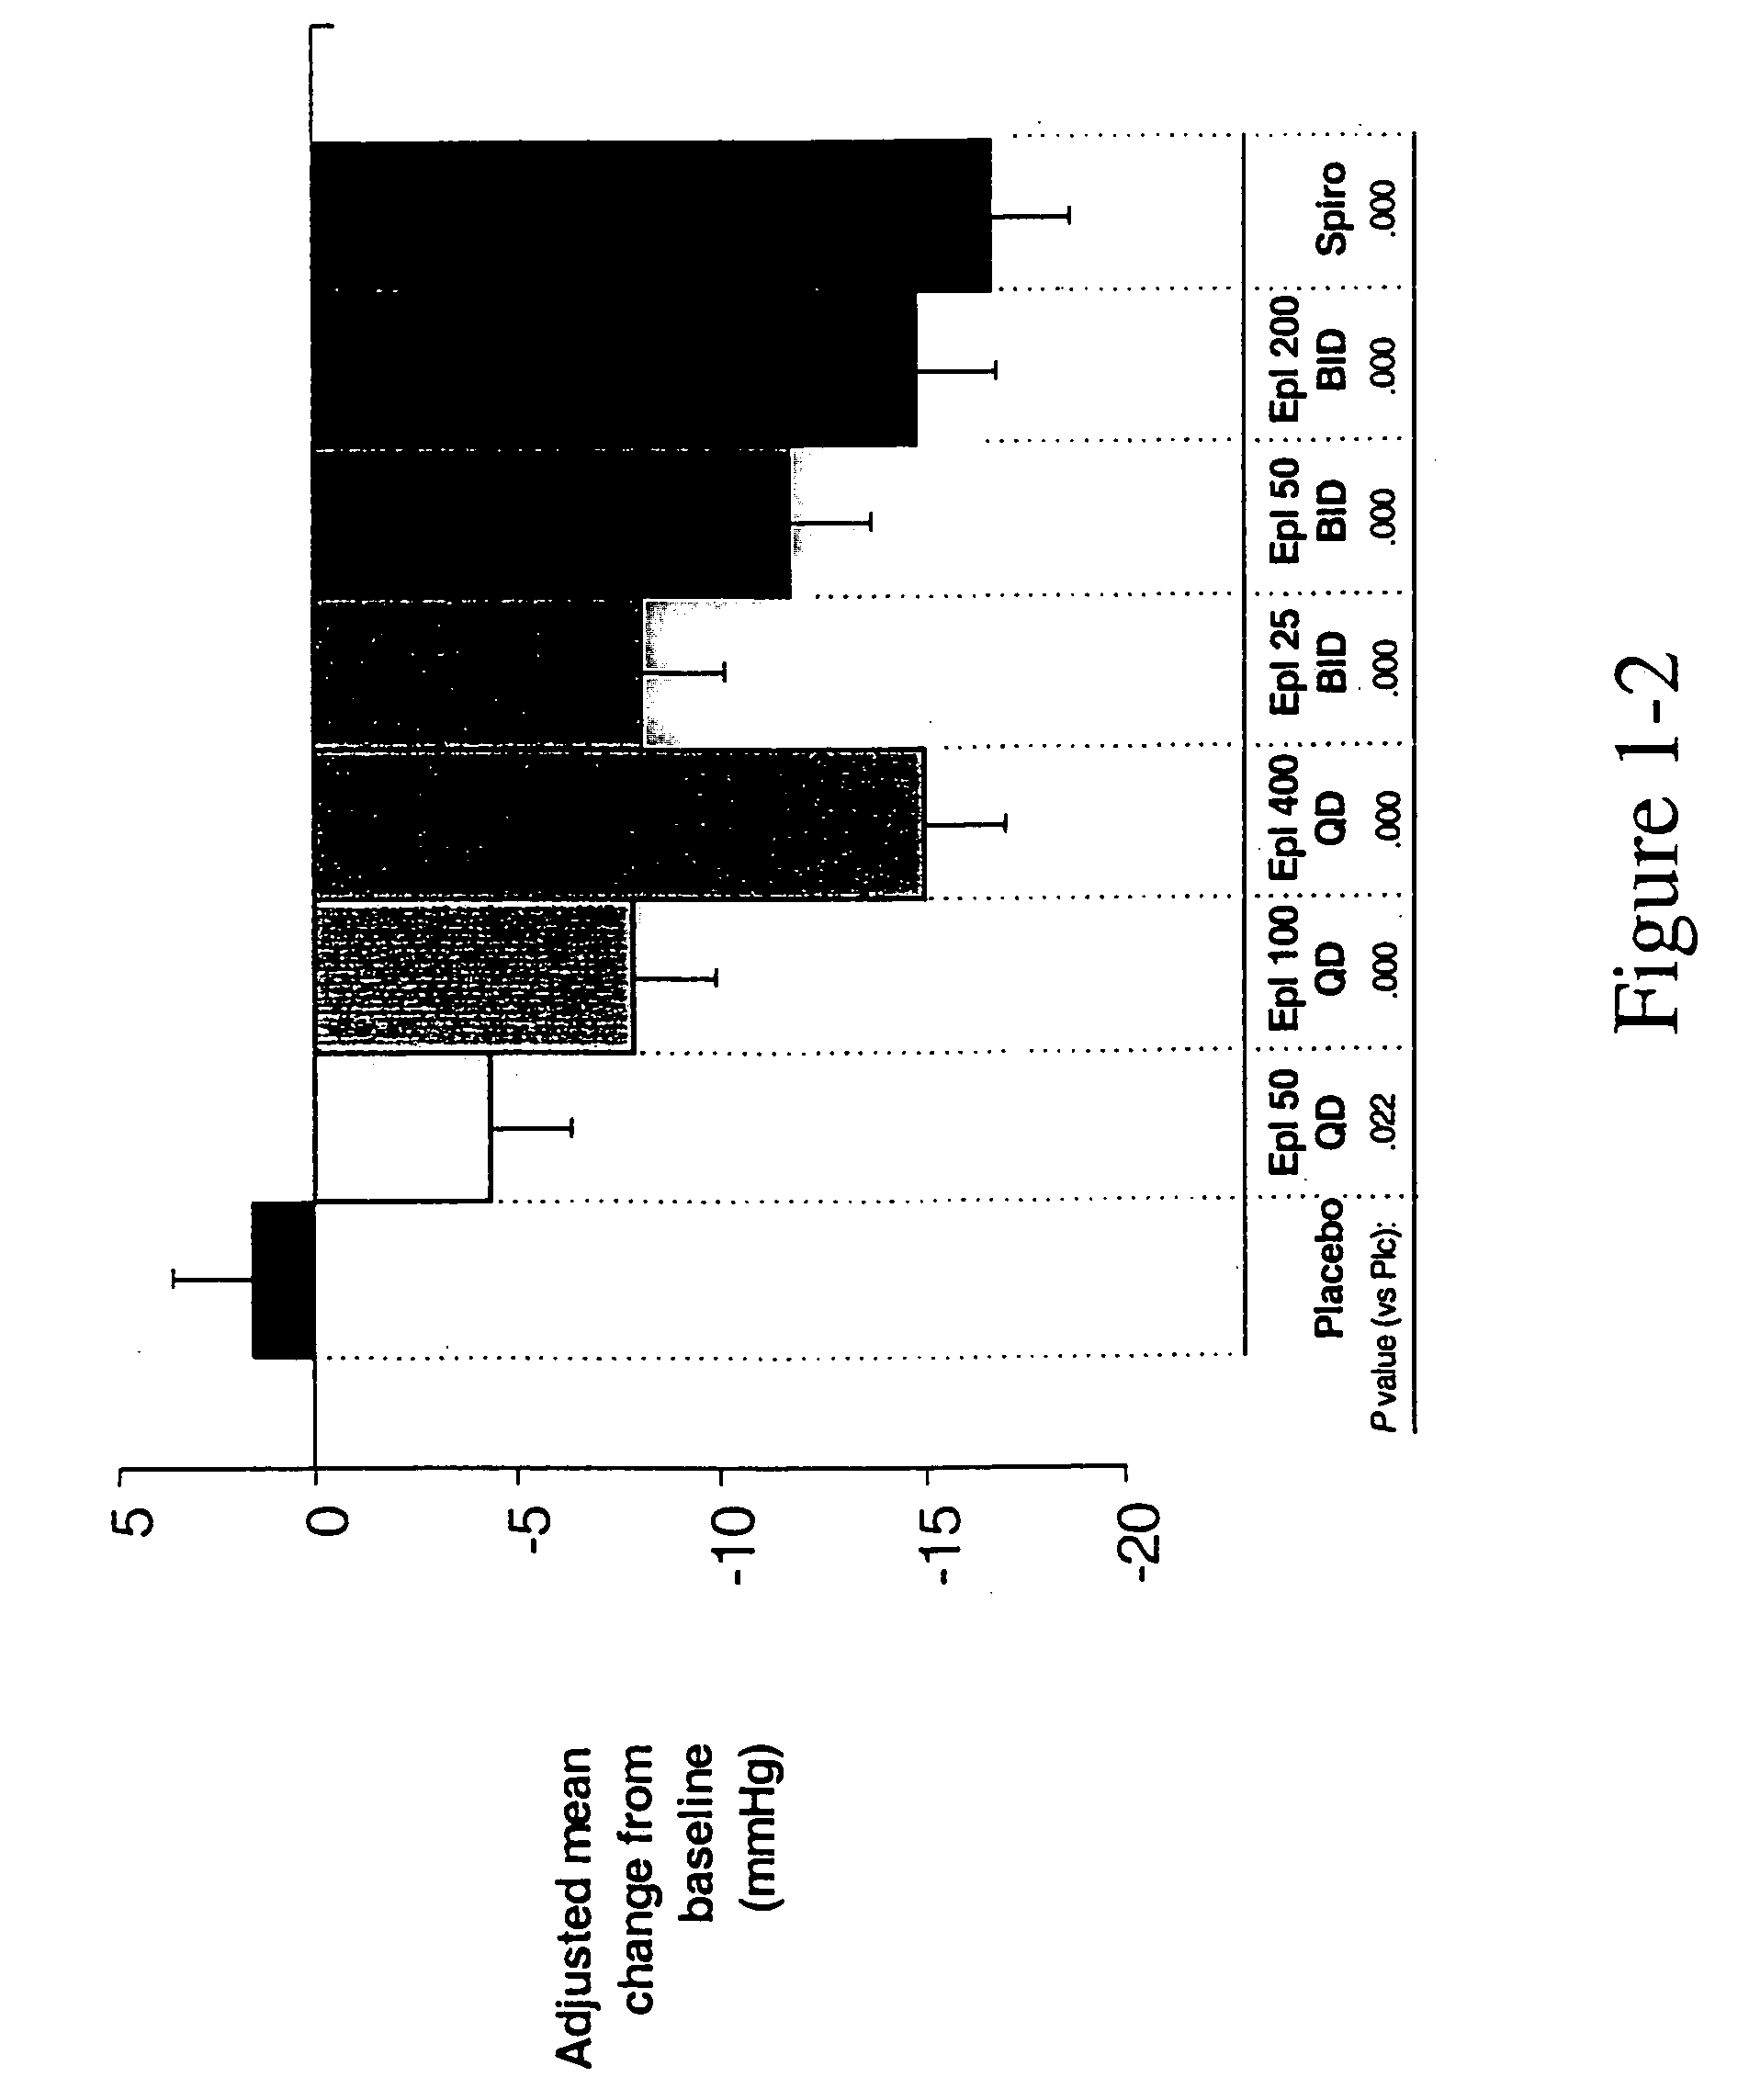 Use of an aldosterone receptor antagonist to improve cognitive function